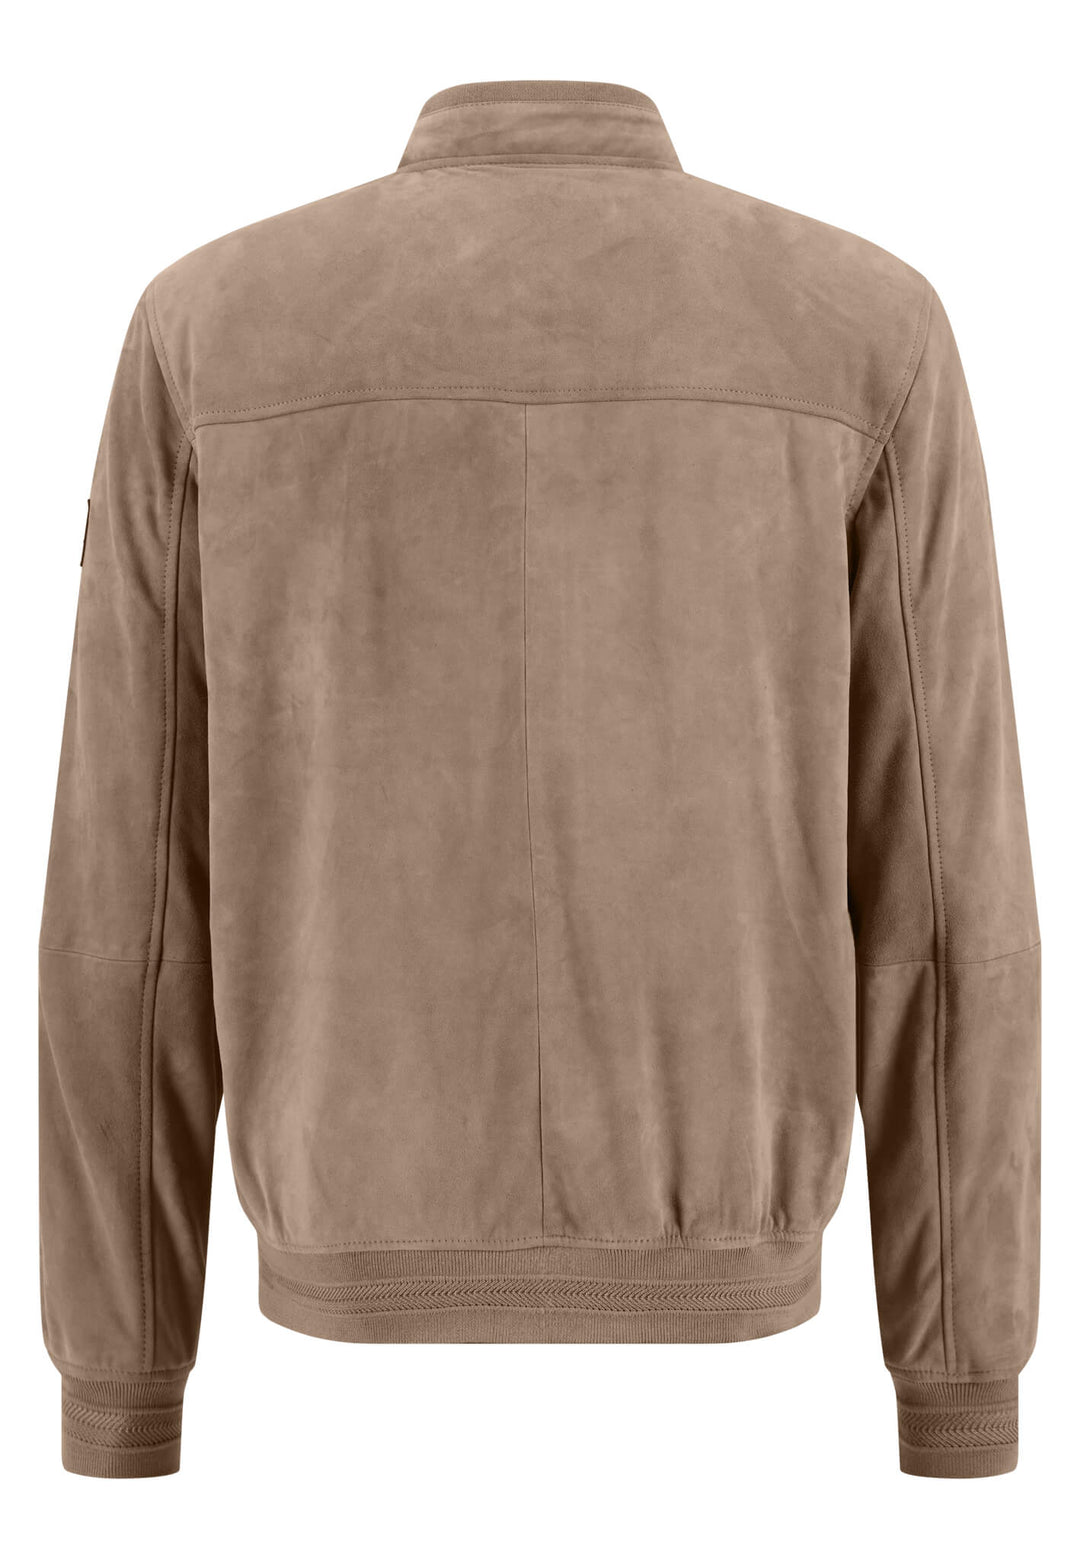 Blouson jacket made of suede